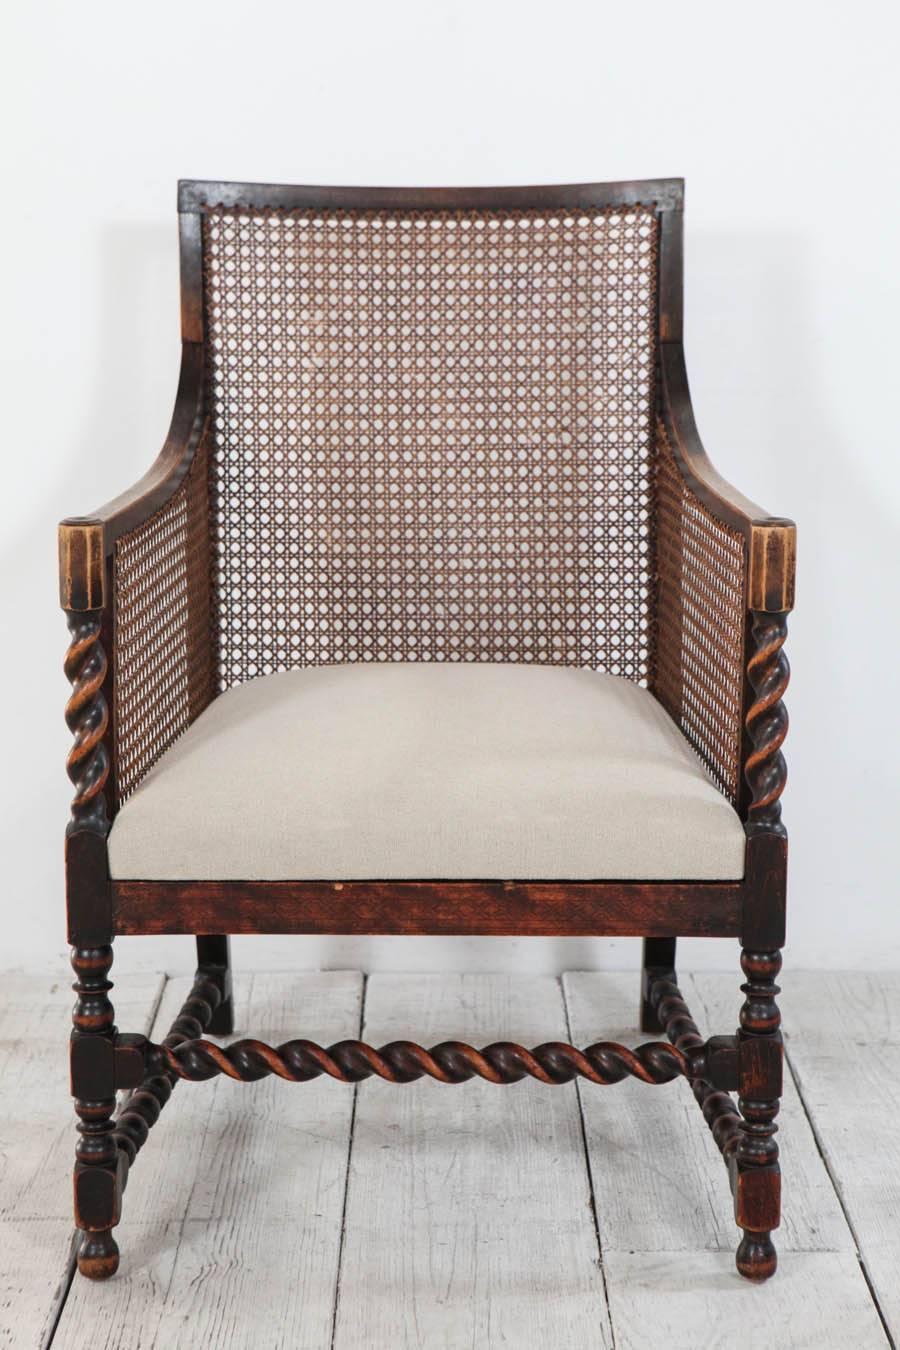 Beautiful one-of-a-kind armchair with exceptional cane and turned wood details.